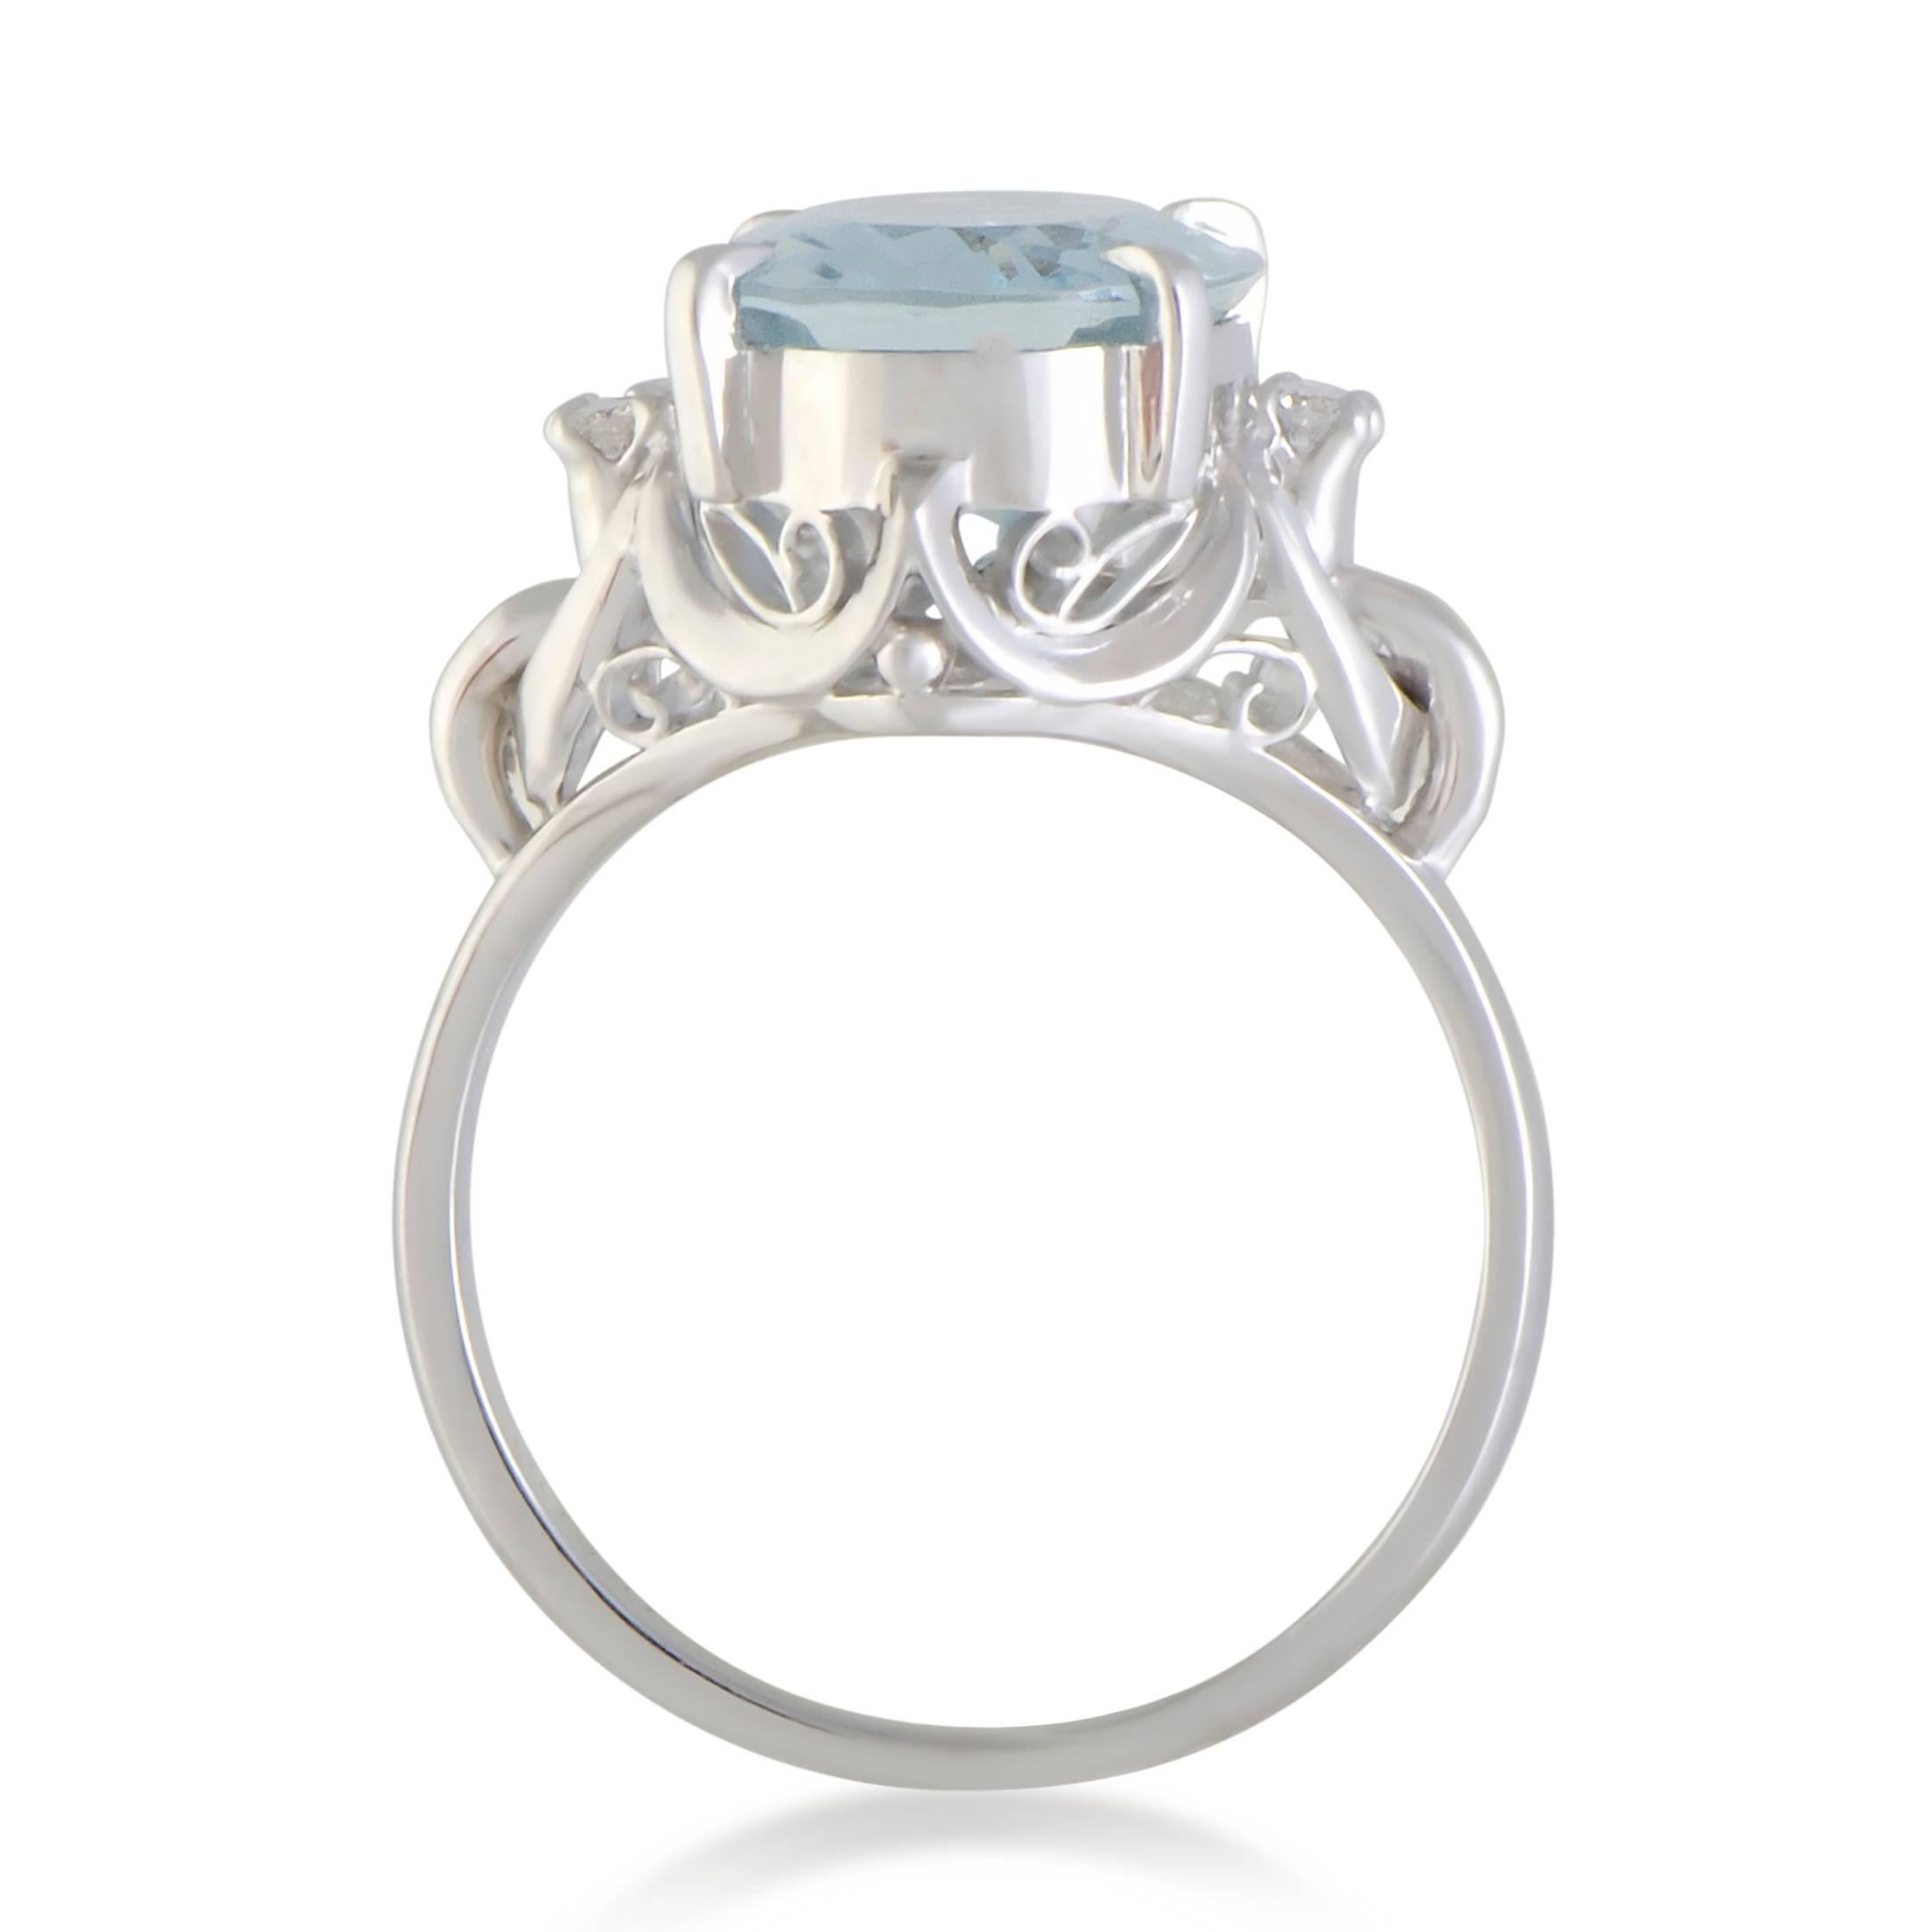 Brilliantly complementing the overall tender spirit of the design, the stylish aquamarine weighing 3.41 carats goes exceptionally well with the splendid platinum as well as the subtle dash of luxurious sparkle from the nifty diamonds totaling 0.08